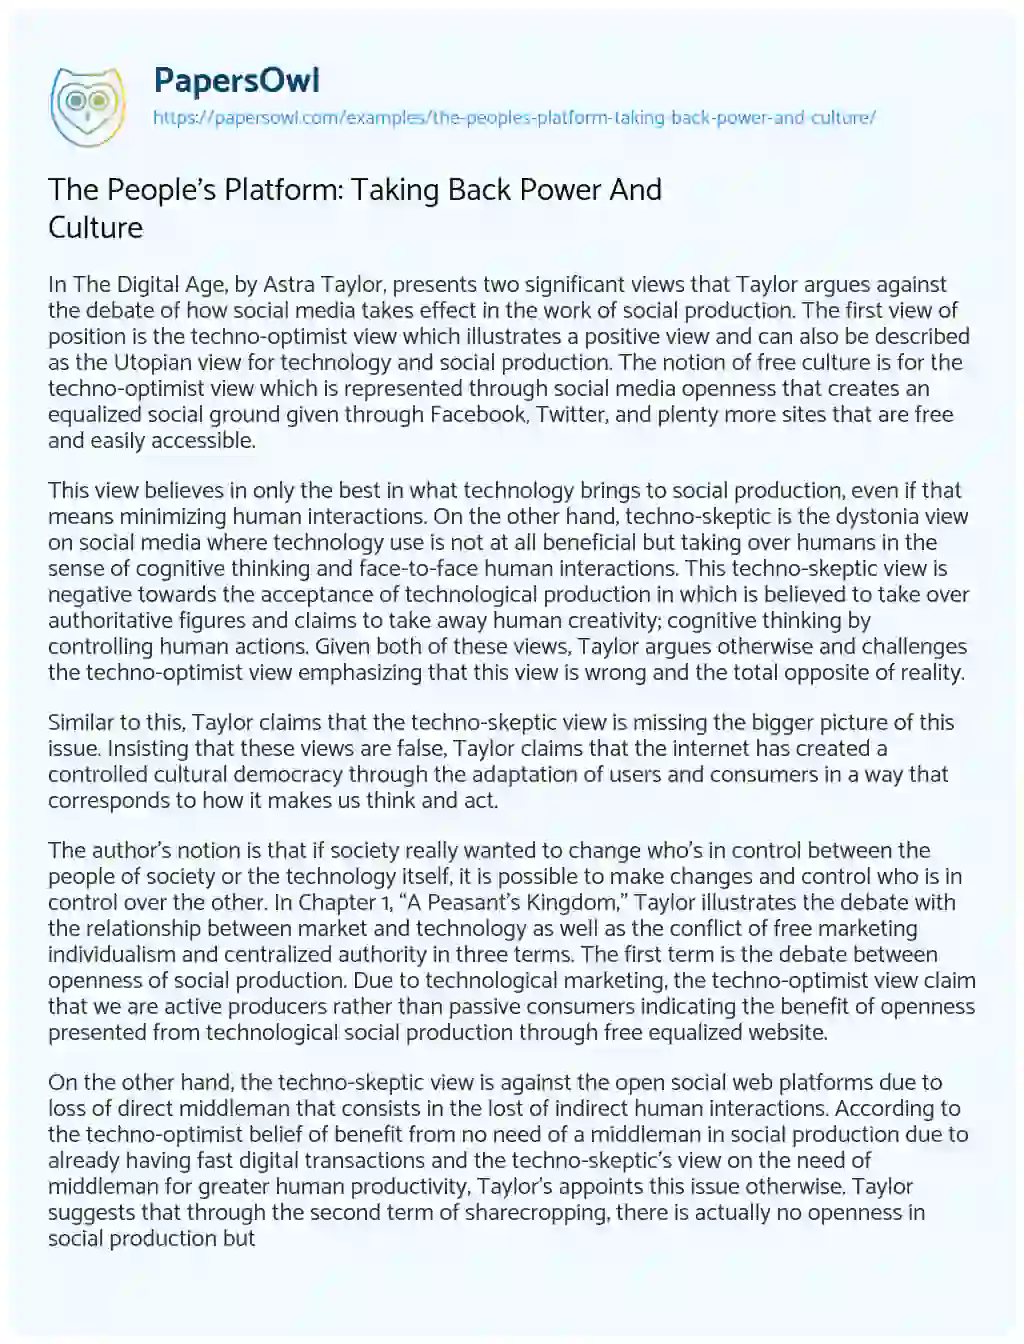 Essay on The People’s Platform: Taking Back Power and Culture